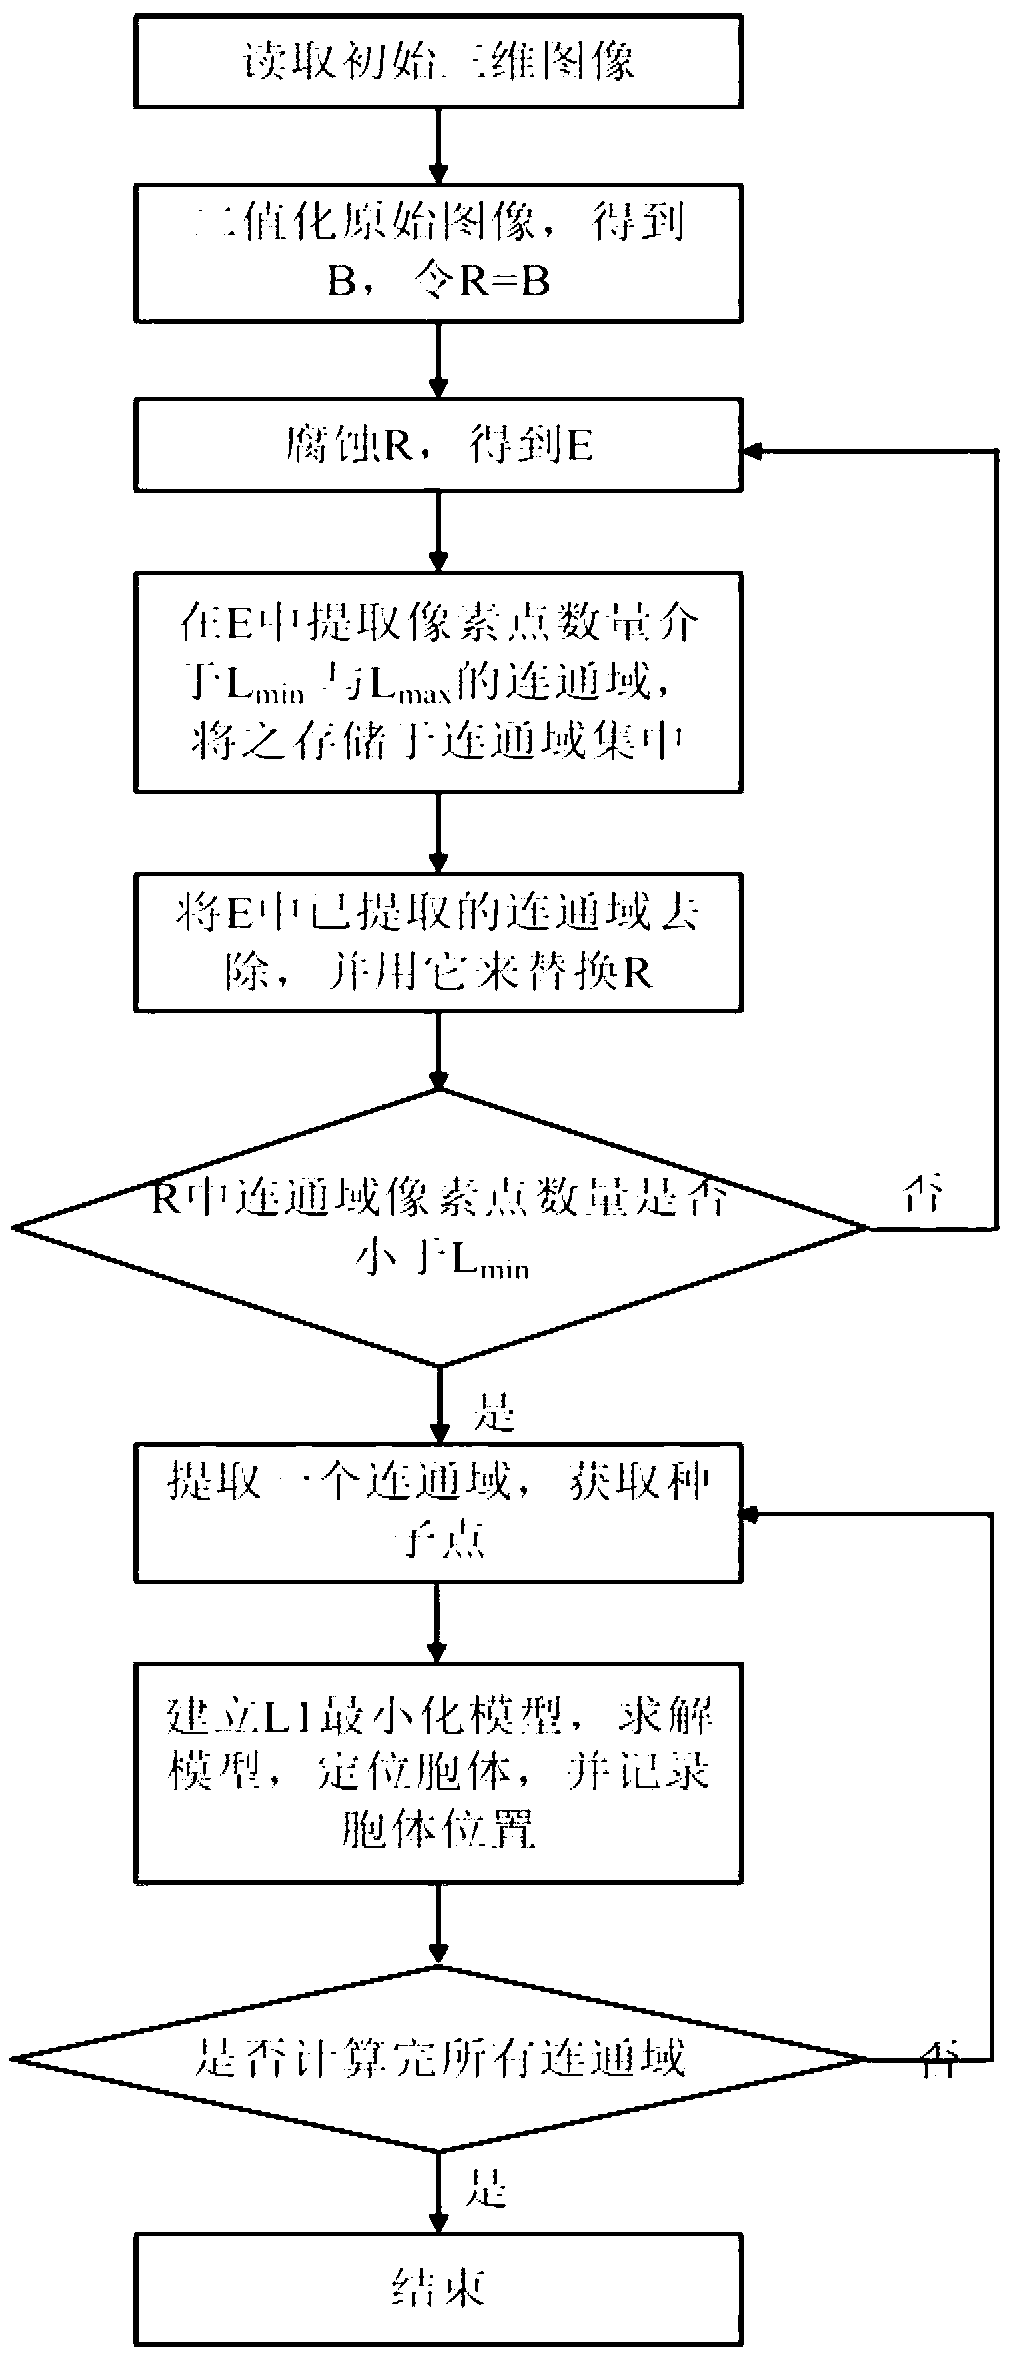 Automatic cell localization method based on minimized model L1